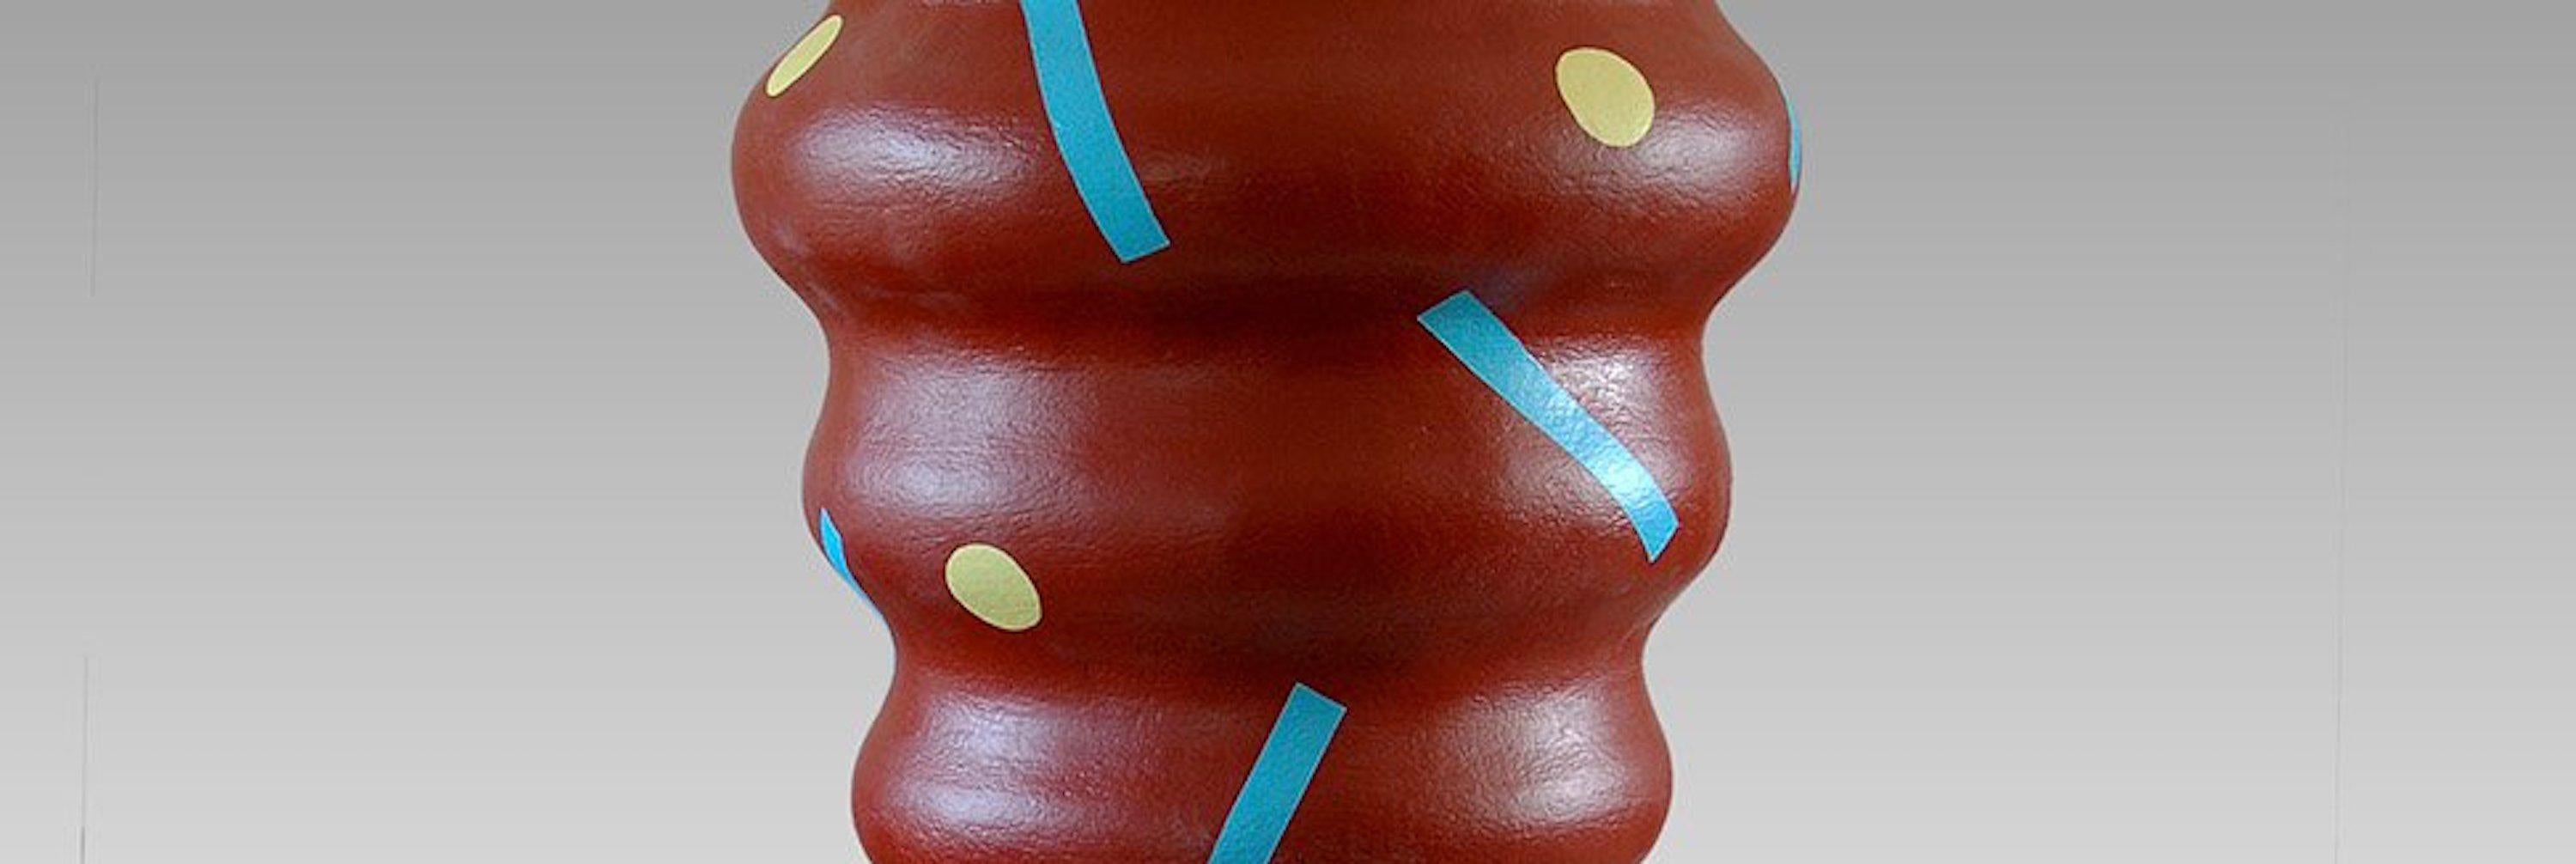 Rattle by Patricia Volk - Abstract ceramic sculpture, painted clay, oxblood For Sale 3